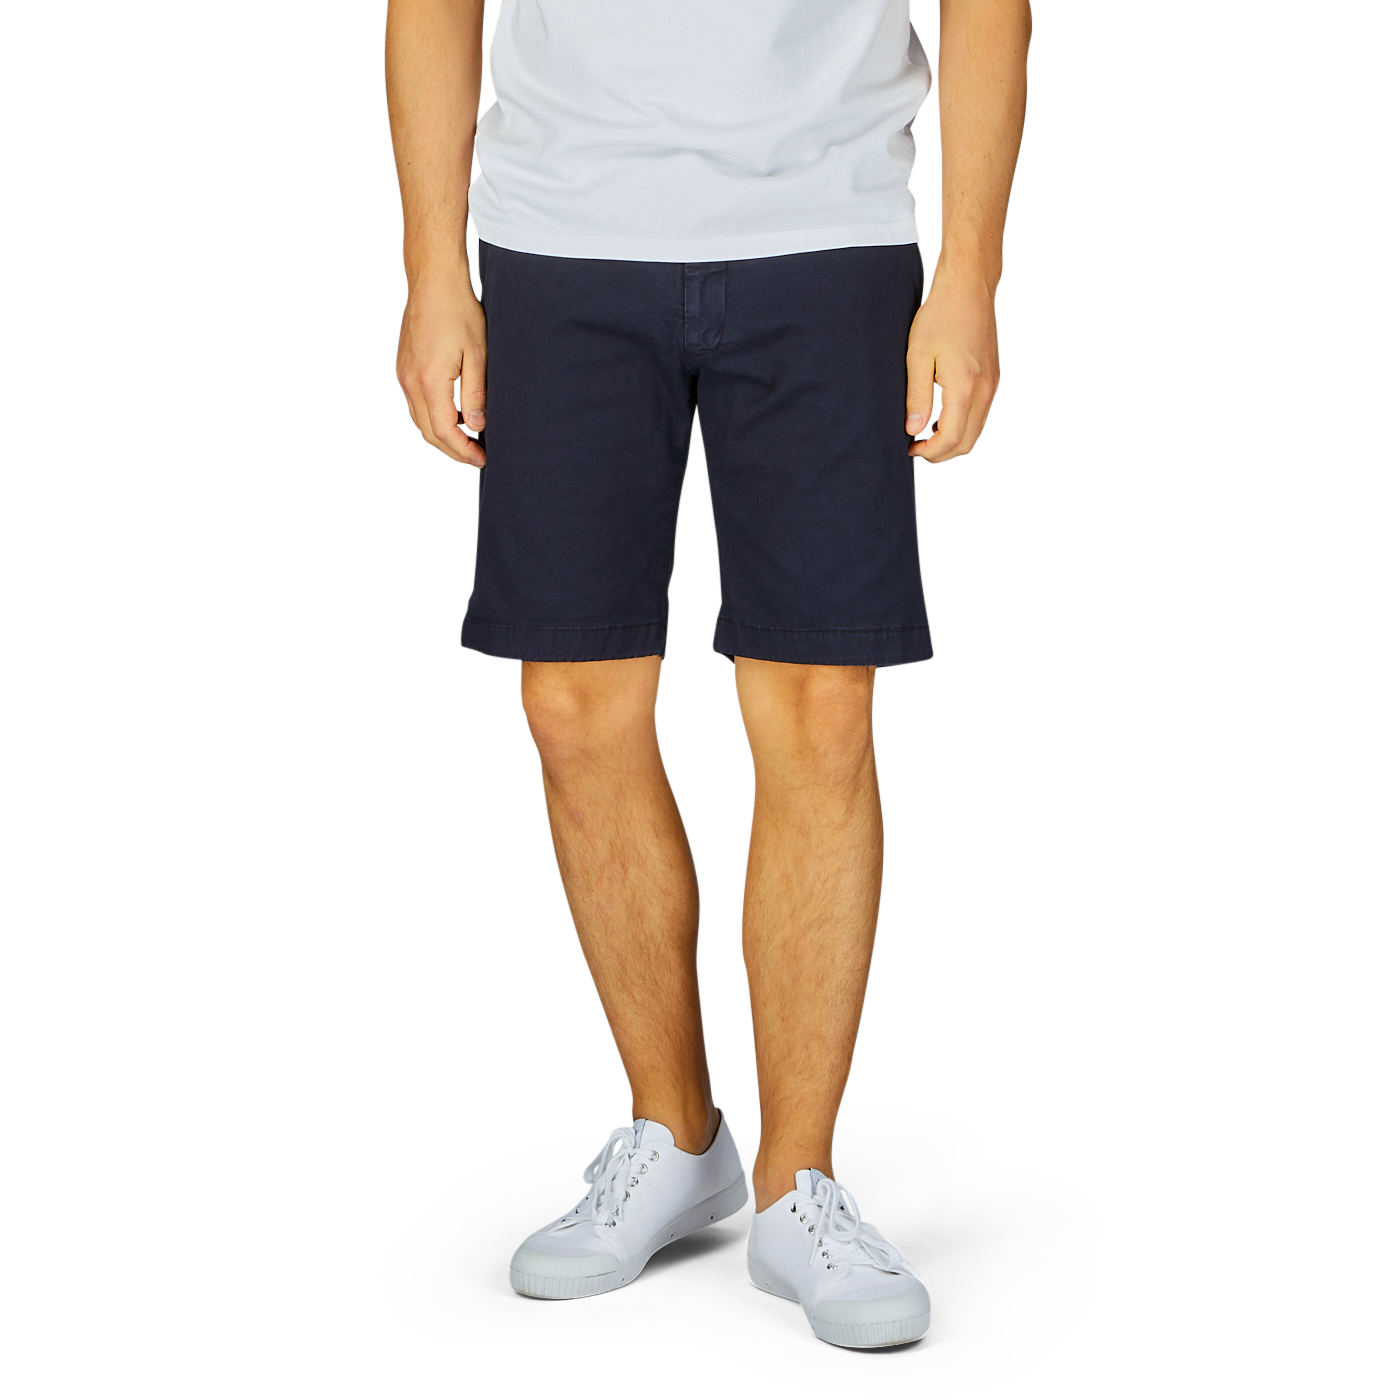 Man wearing Berwich navy blue cotton stretch Bermuda shorts and white sneakers standing against a light background, ready for summer vacation.